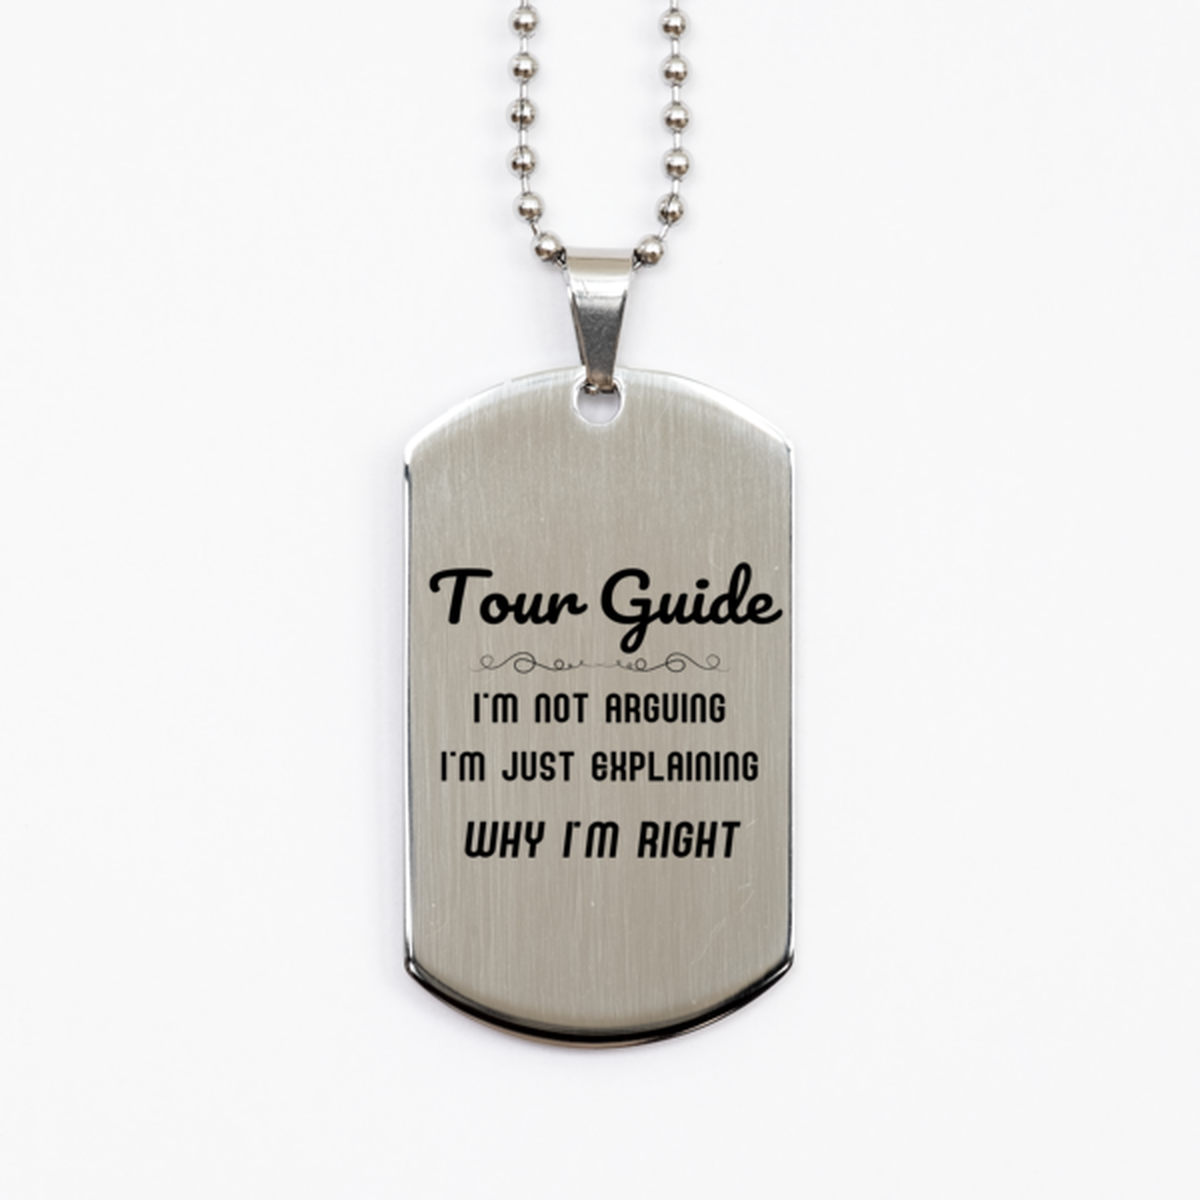 Tour Guide I'm not Arguing. I'm Just Explaining Why I'm RIGHT Silver Dog Tag, Funny Saying Quote Tour Guide Gifts For Tour Guide Graduation Birthday Christmas Gifts for Men Women Coworker